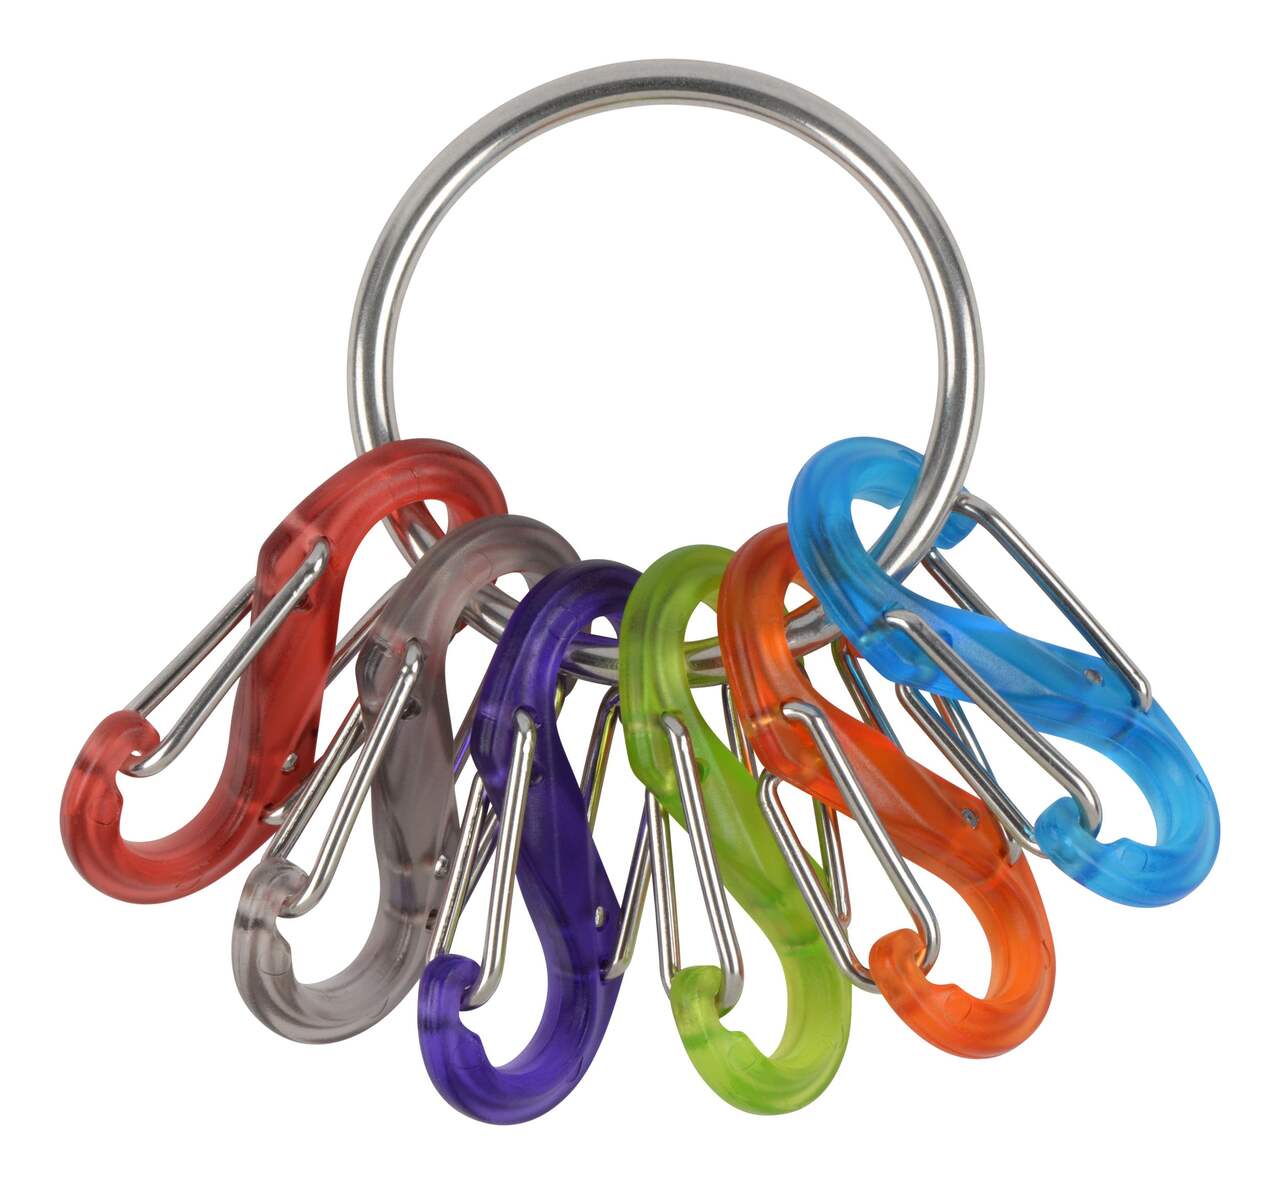 Nite Ize KeyRing S-Biner Identification Keychain w/ 6 Colour-Coded  S-Carabiner Clips